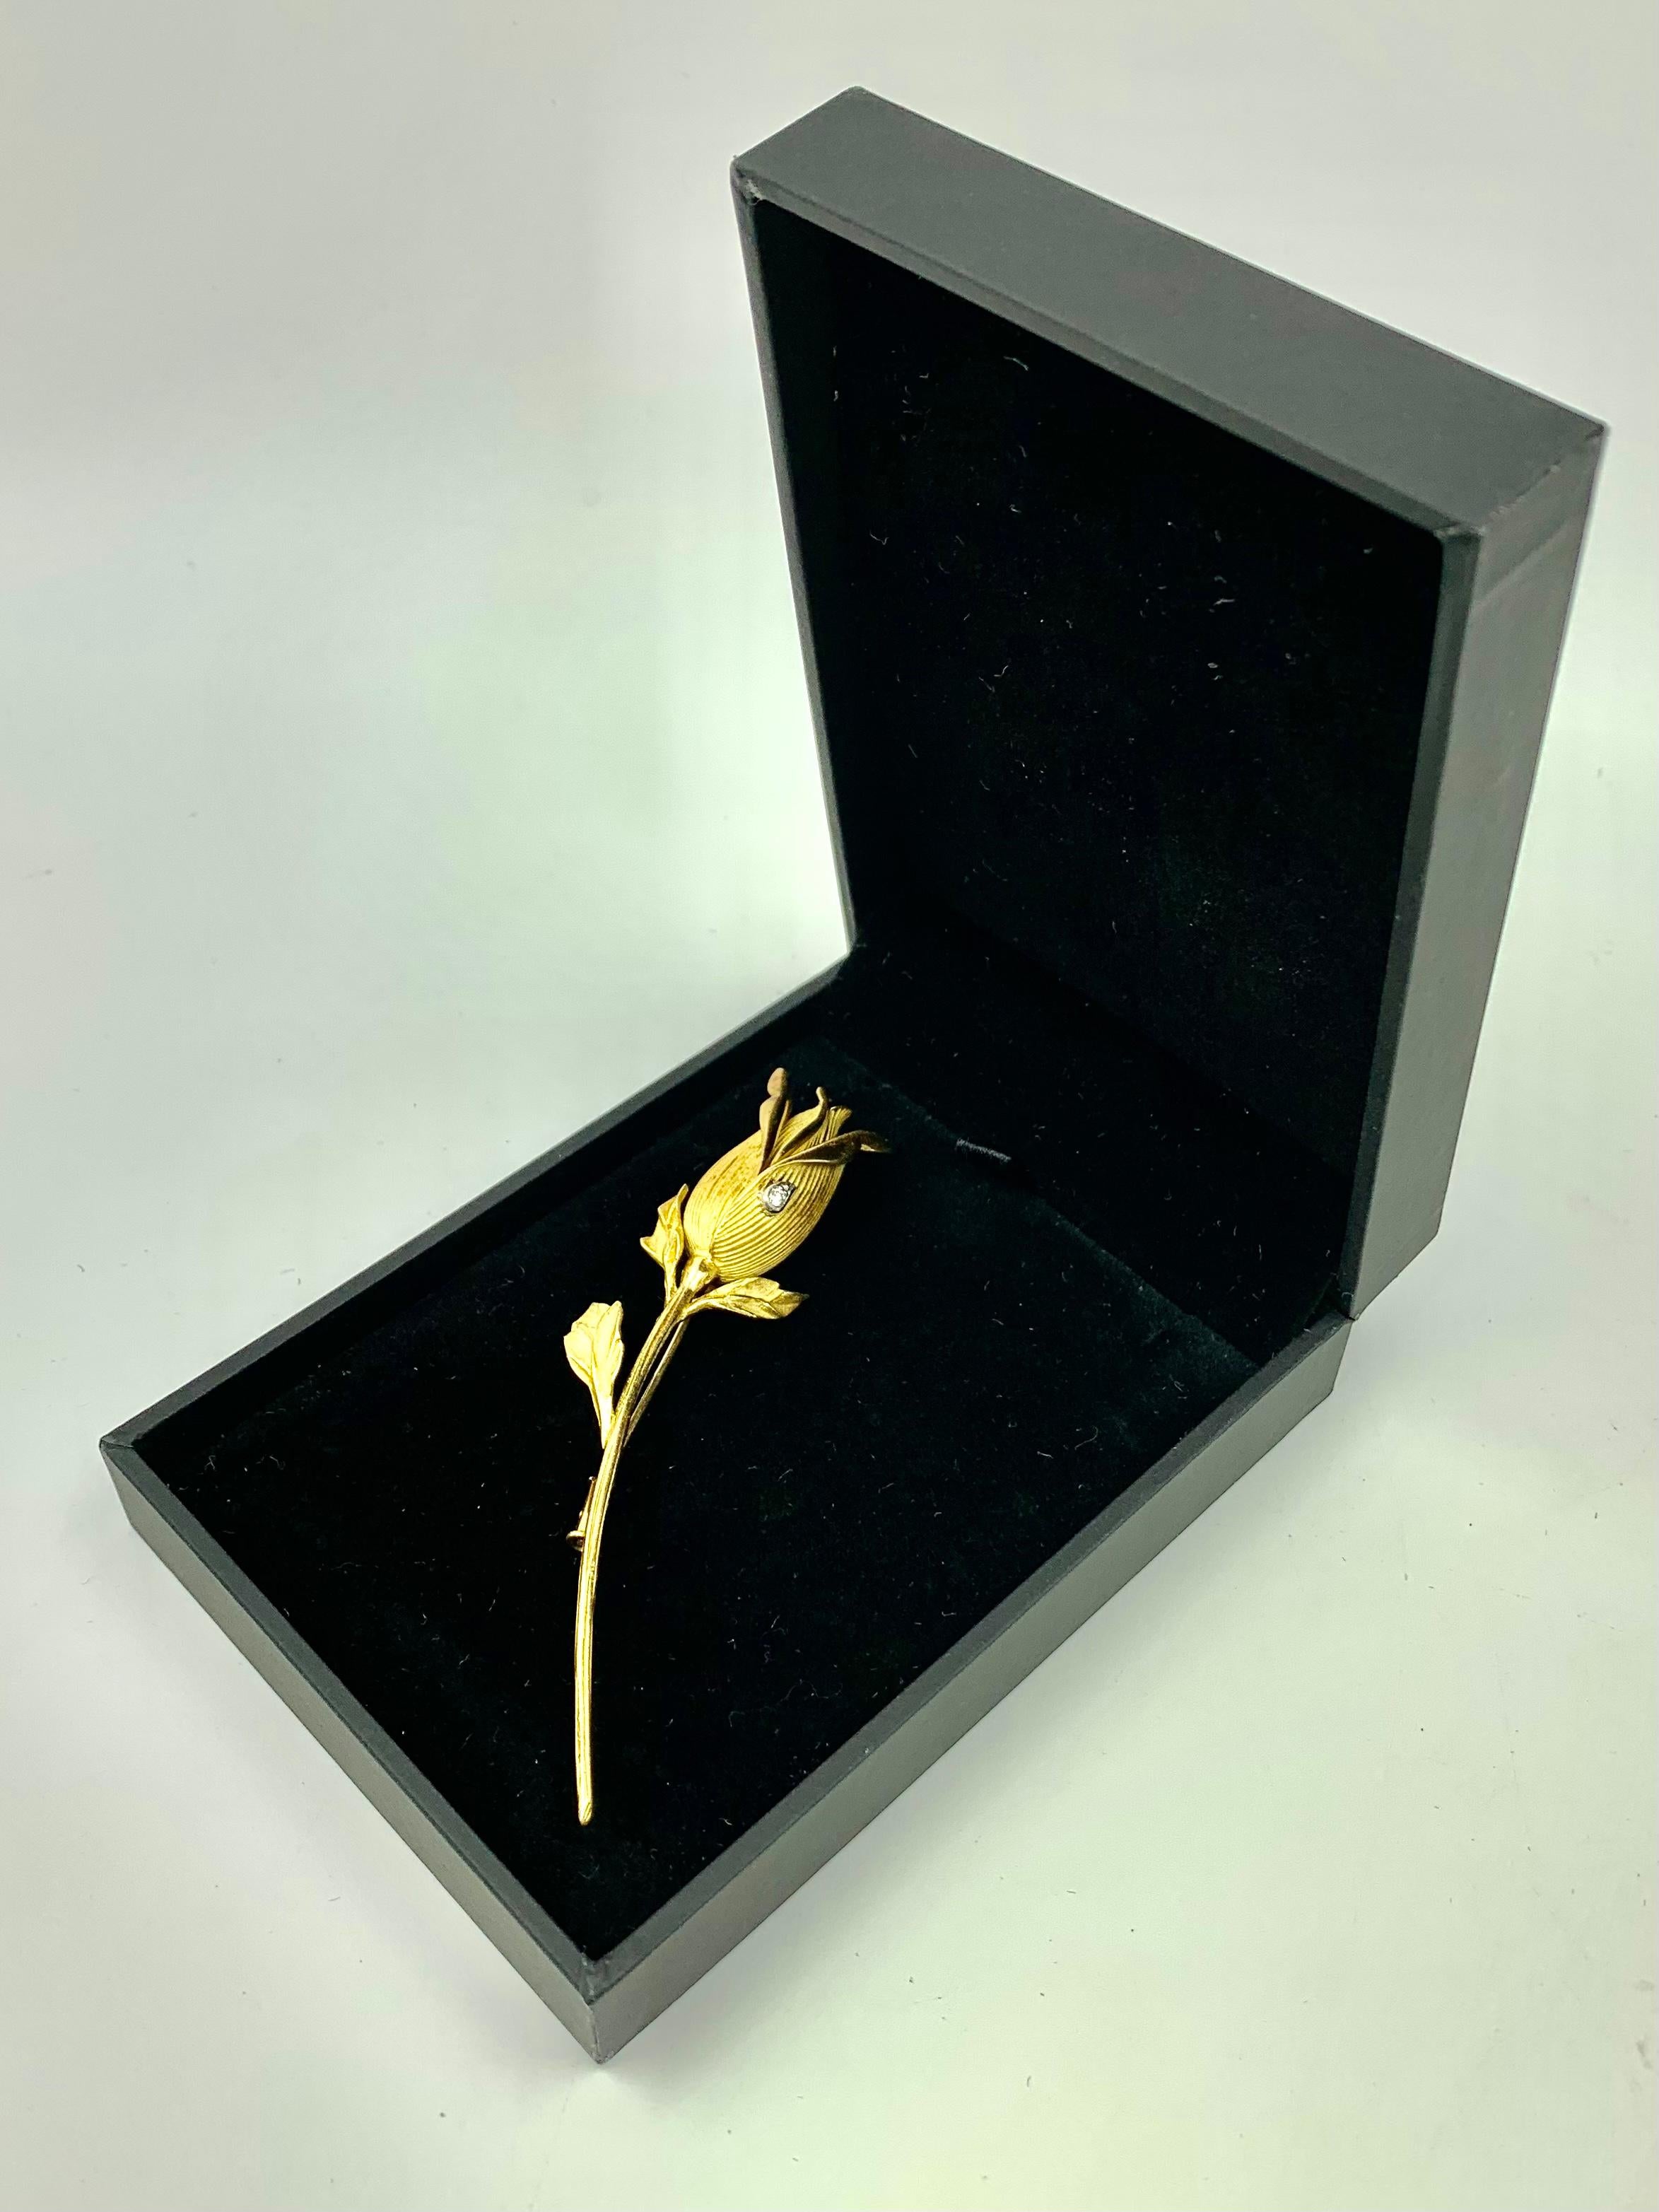 Romantic Eternal Rose 18k yellow gold brooch with a diamond dew drop accent by Rene Kern, Paris.
Naturalistically modelled with fine detail textured, matte and polished finish.
Large scale measuring 3.25 inches in length.
The earliest roses date to